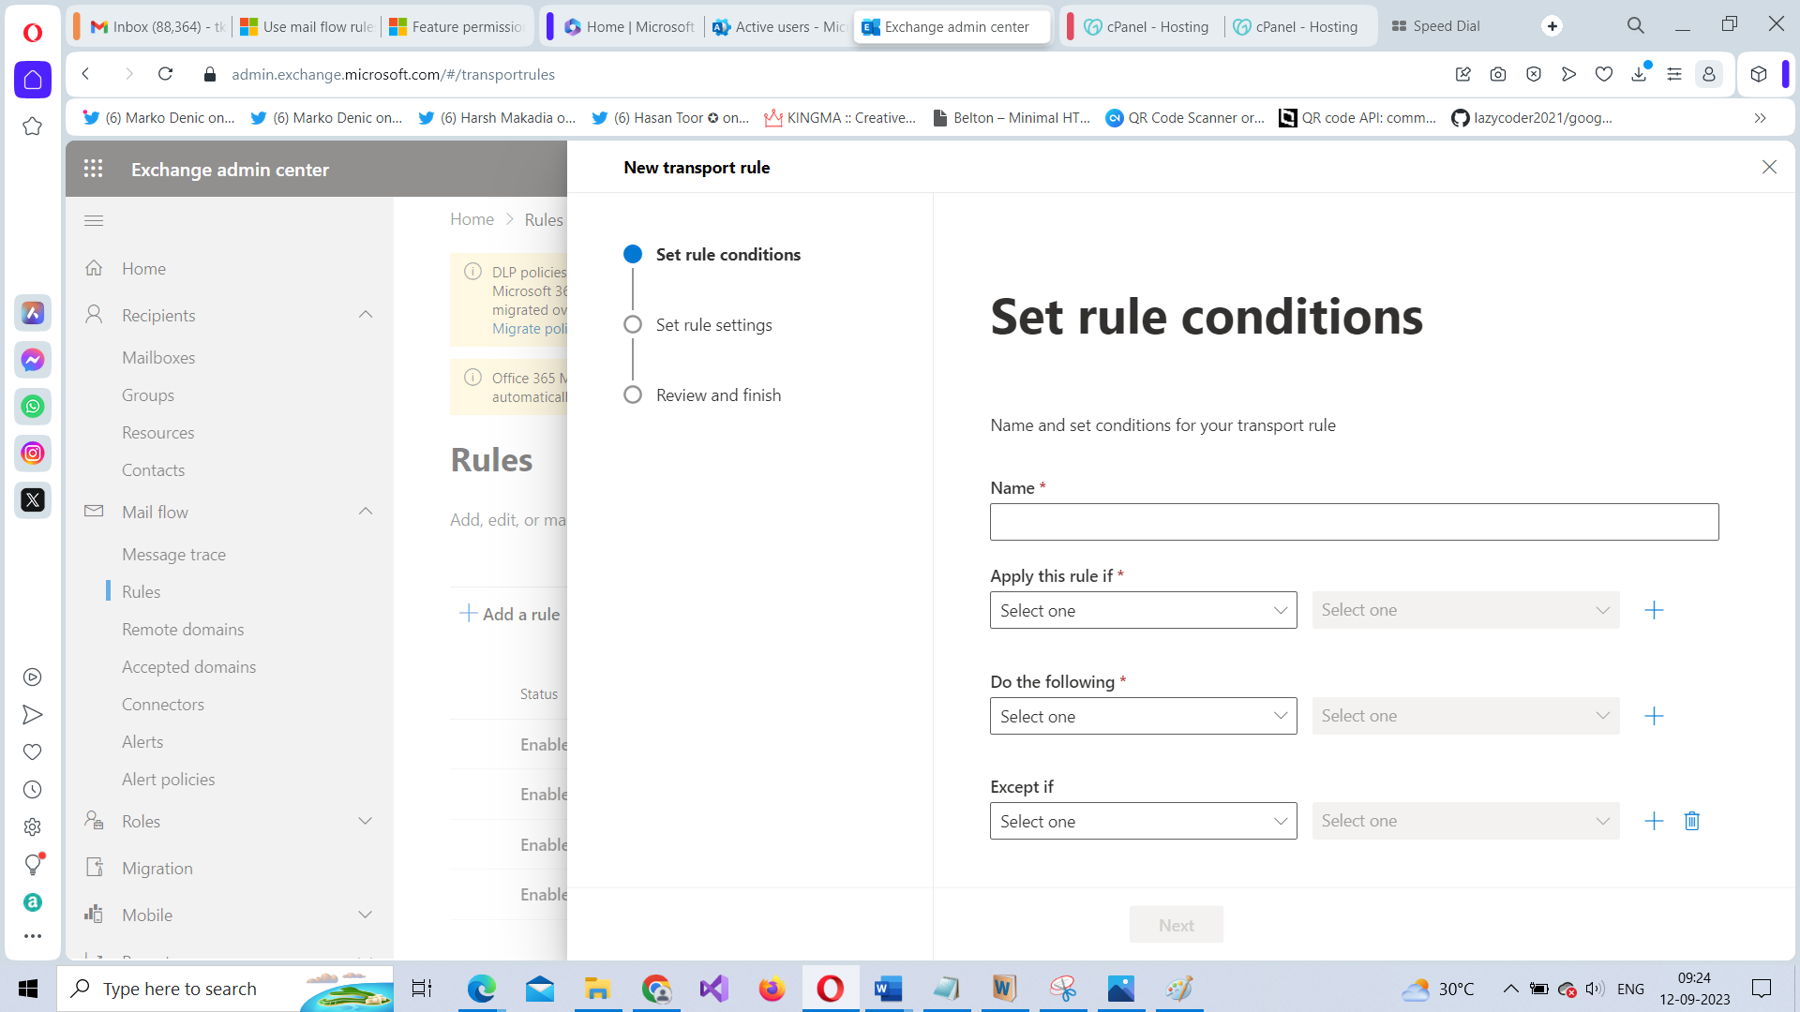 This screenshot shows how you can set the conditions for the Microsoft 365 mail flow rule in the Microsoft 365 Exchange admin center.